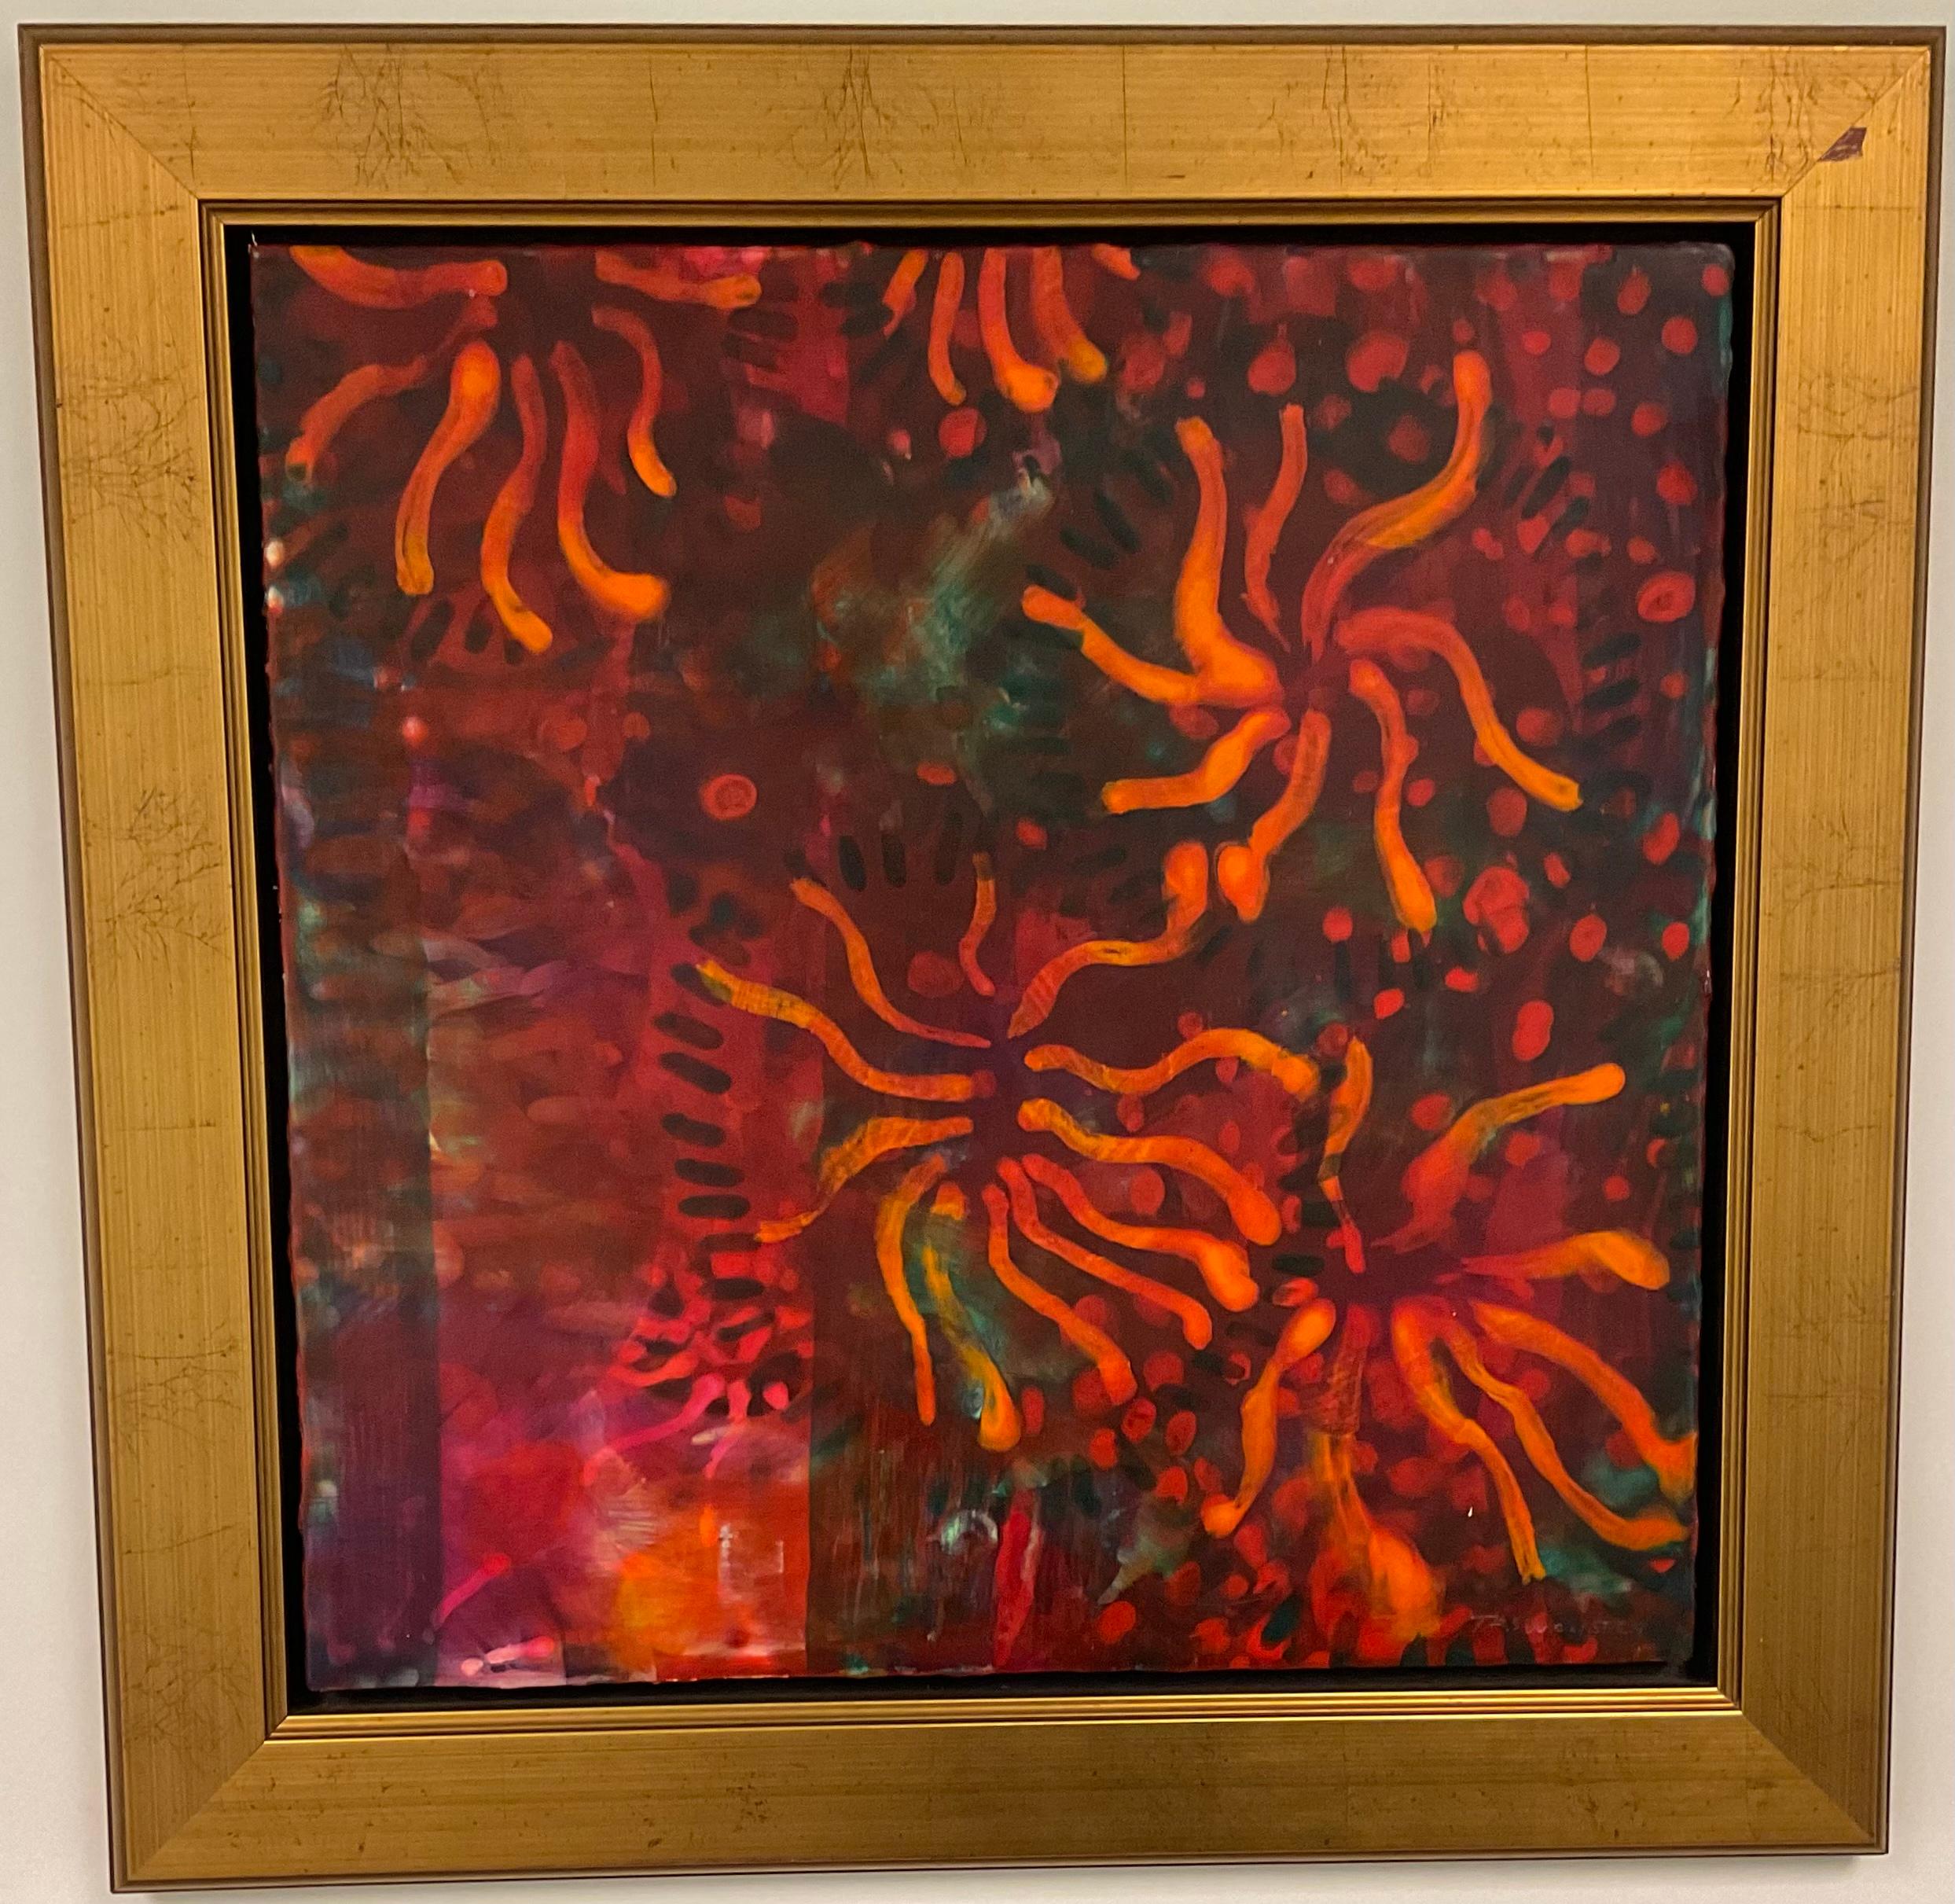 Very Vibrant Encaustic painting titled Swimming in Tokyo by world renowned artist Thomas Swanston. The painting was executed in 2003. The actual painting size is 18 by 18 inches. 

Thomas Swanston was born 1956 in Annapolis Md., Naval Hospital. He